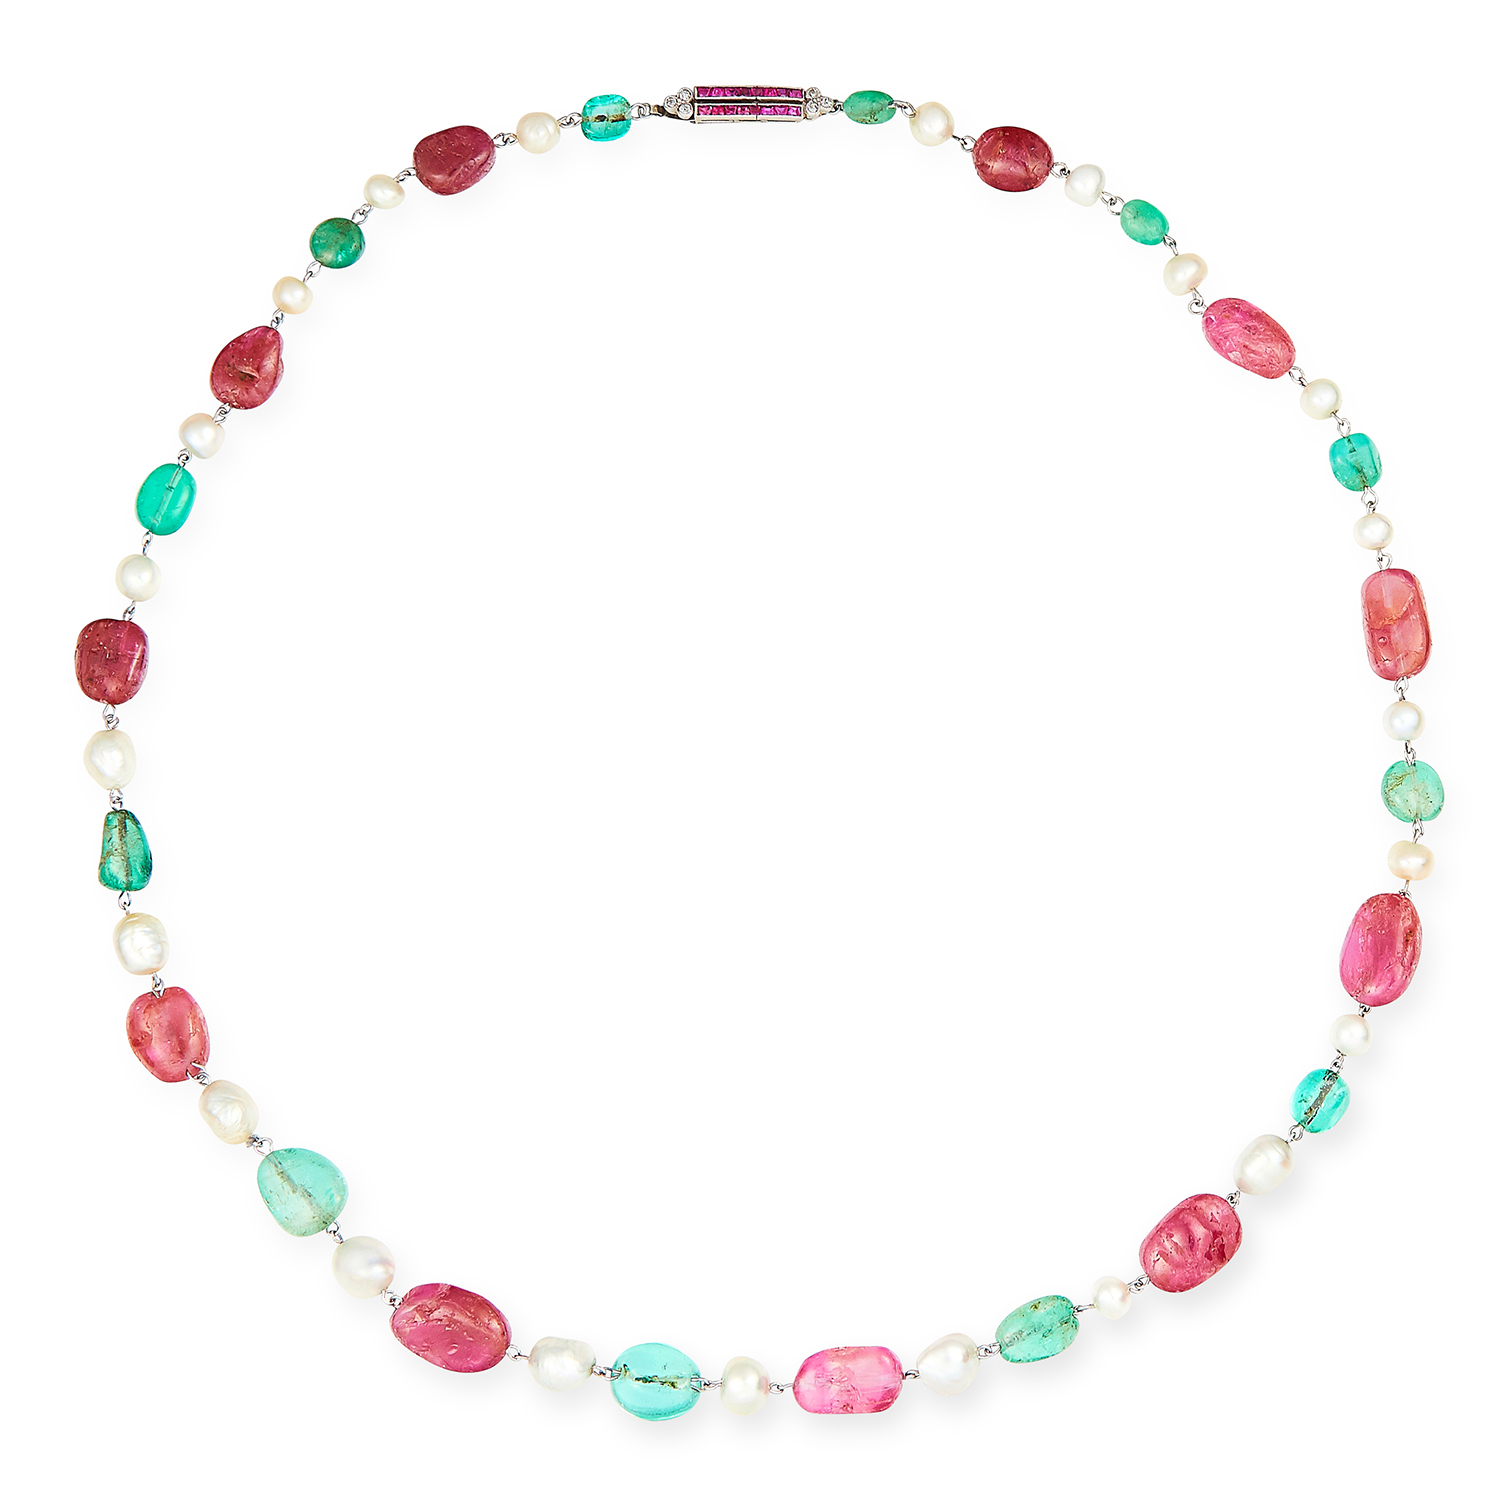 BURMA RUBY, COLOMBIAN EMERALD AND NATURAL SALTWATER PEARL NECKLACE in white gold or platinum,